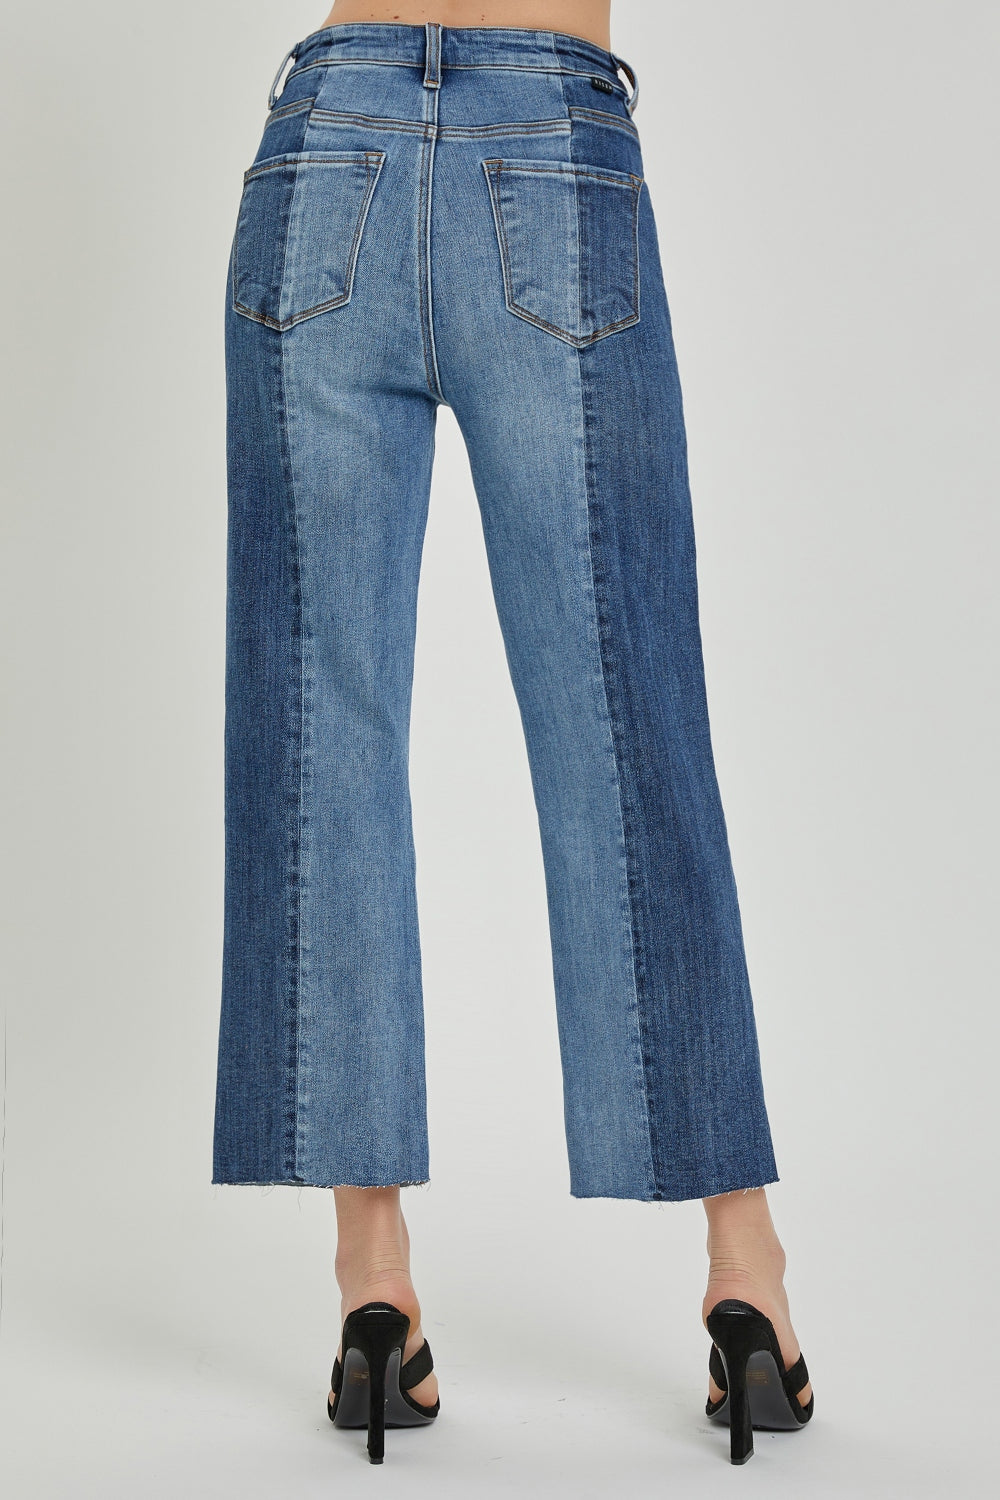 Marla Mid-Rise Waist Two-Tones Jeans with Pockets - RISEN